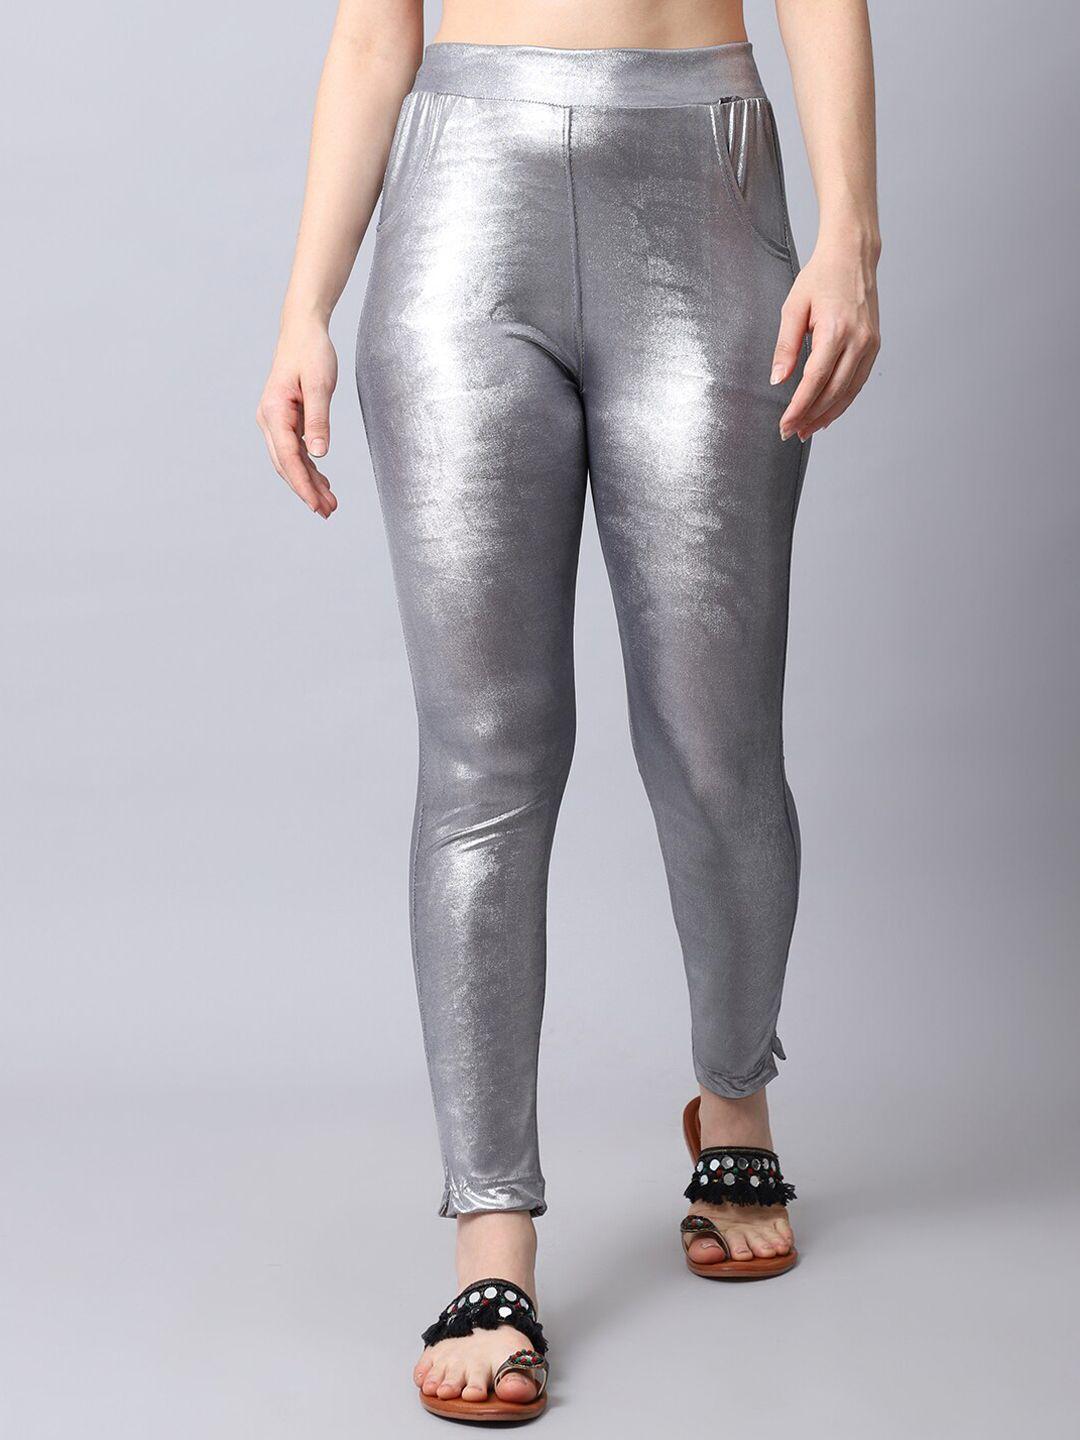 tag 7 women silver-toned solid ankle-length leggings